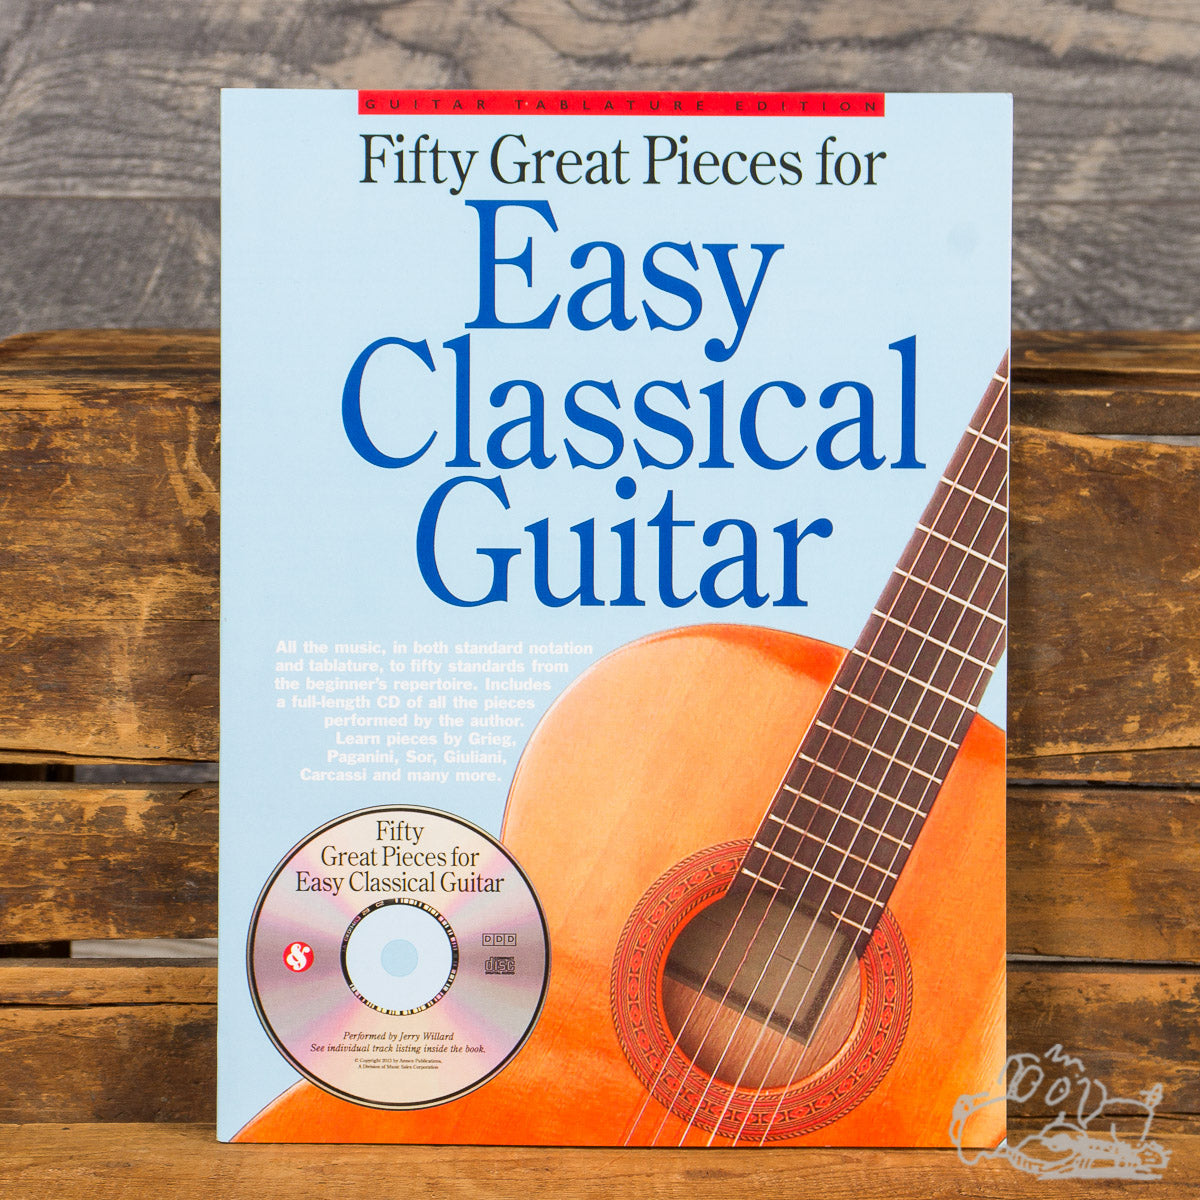 Fifty Great Pieces for Easy Classical Guitar by Jerry Willard - CD Included!